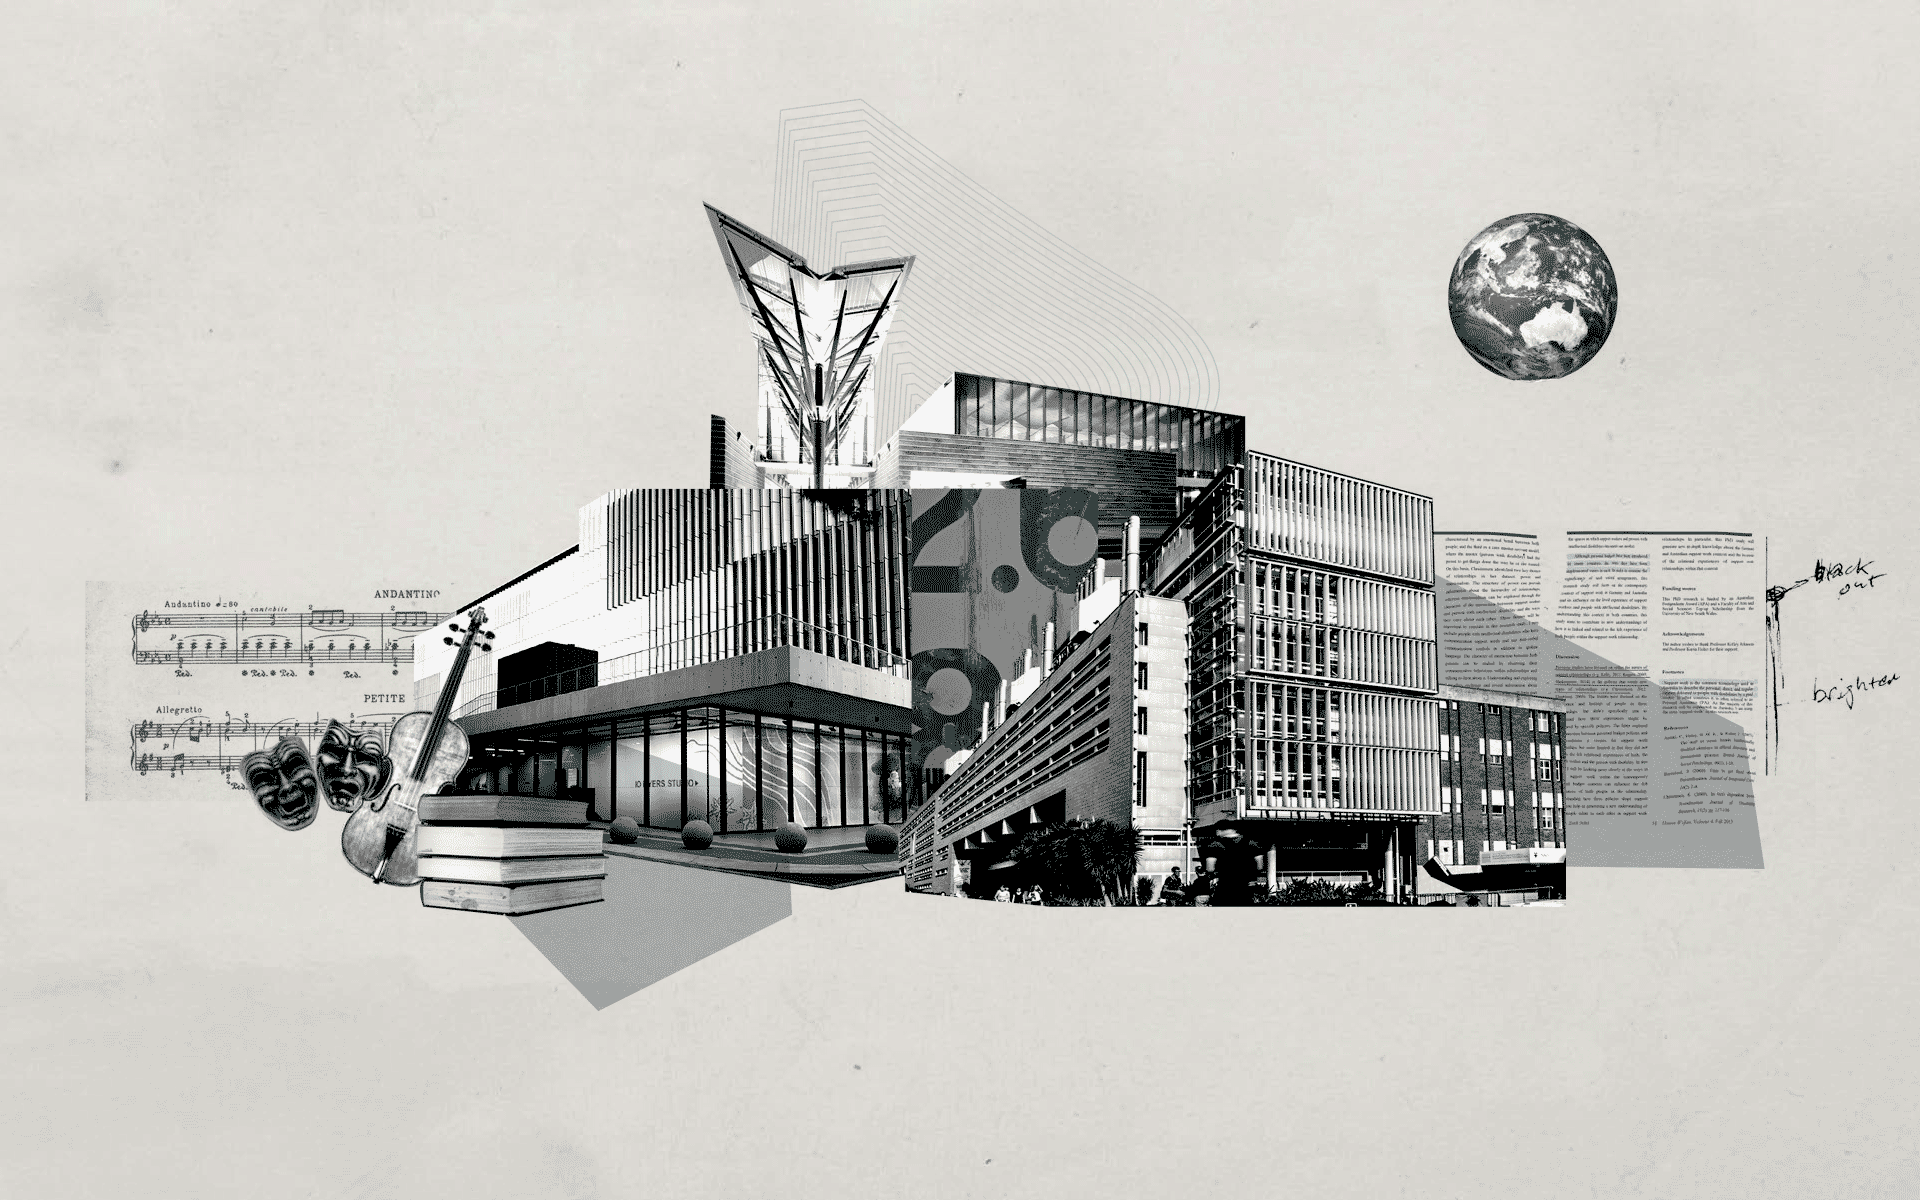 Collage of buildings and images.